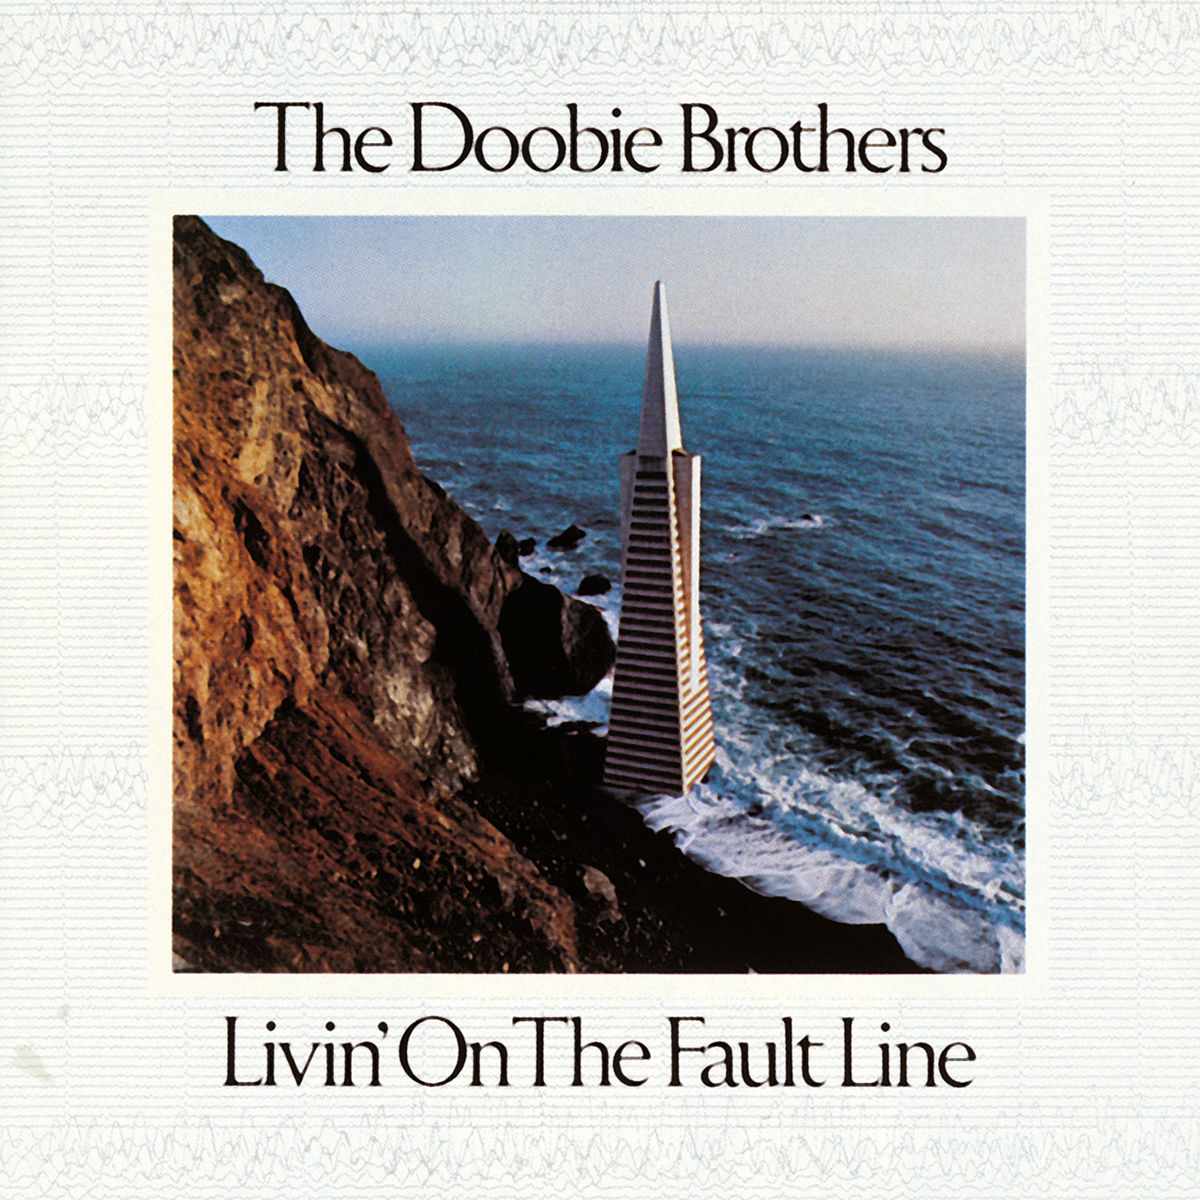 The Doobie Brothers - Livin’ On The Fault Line (1977) (2016 Remastered) [HDTracks FLAC 24bit/192kHz]